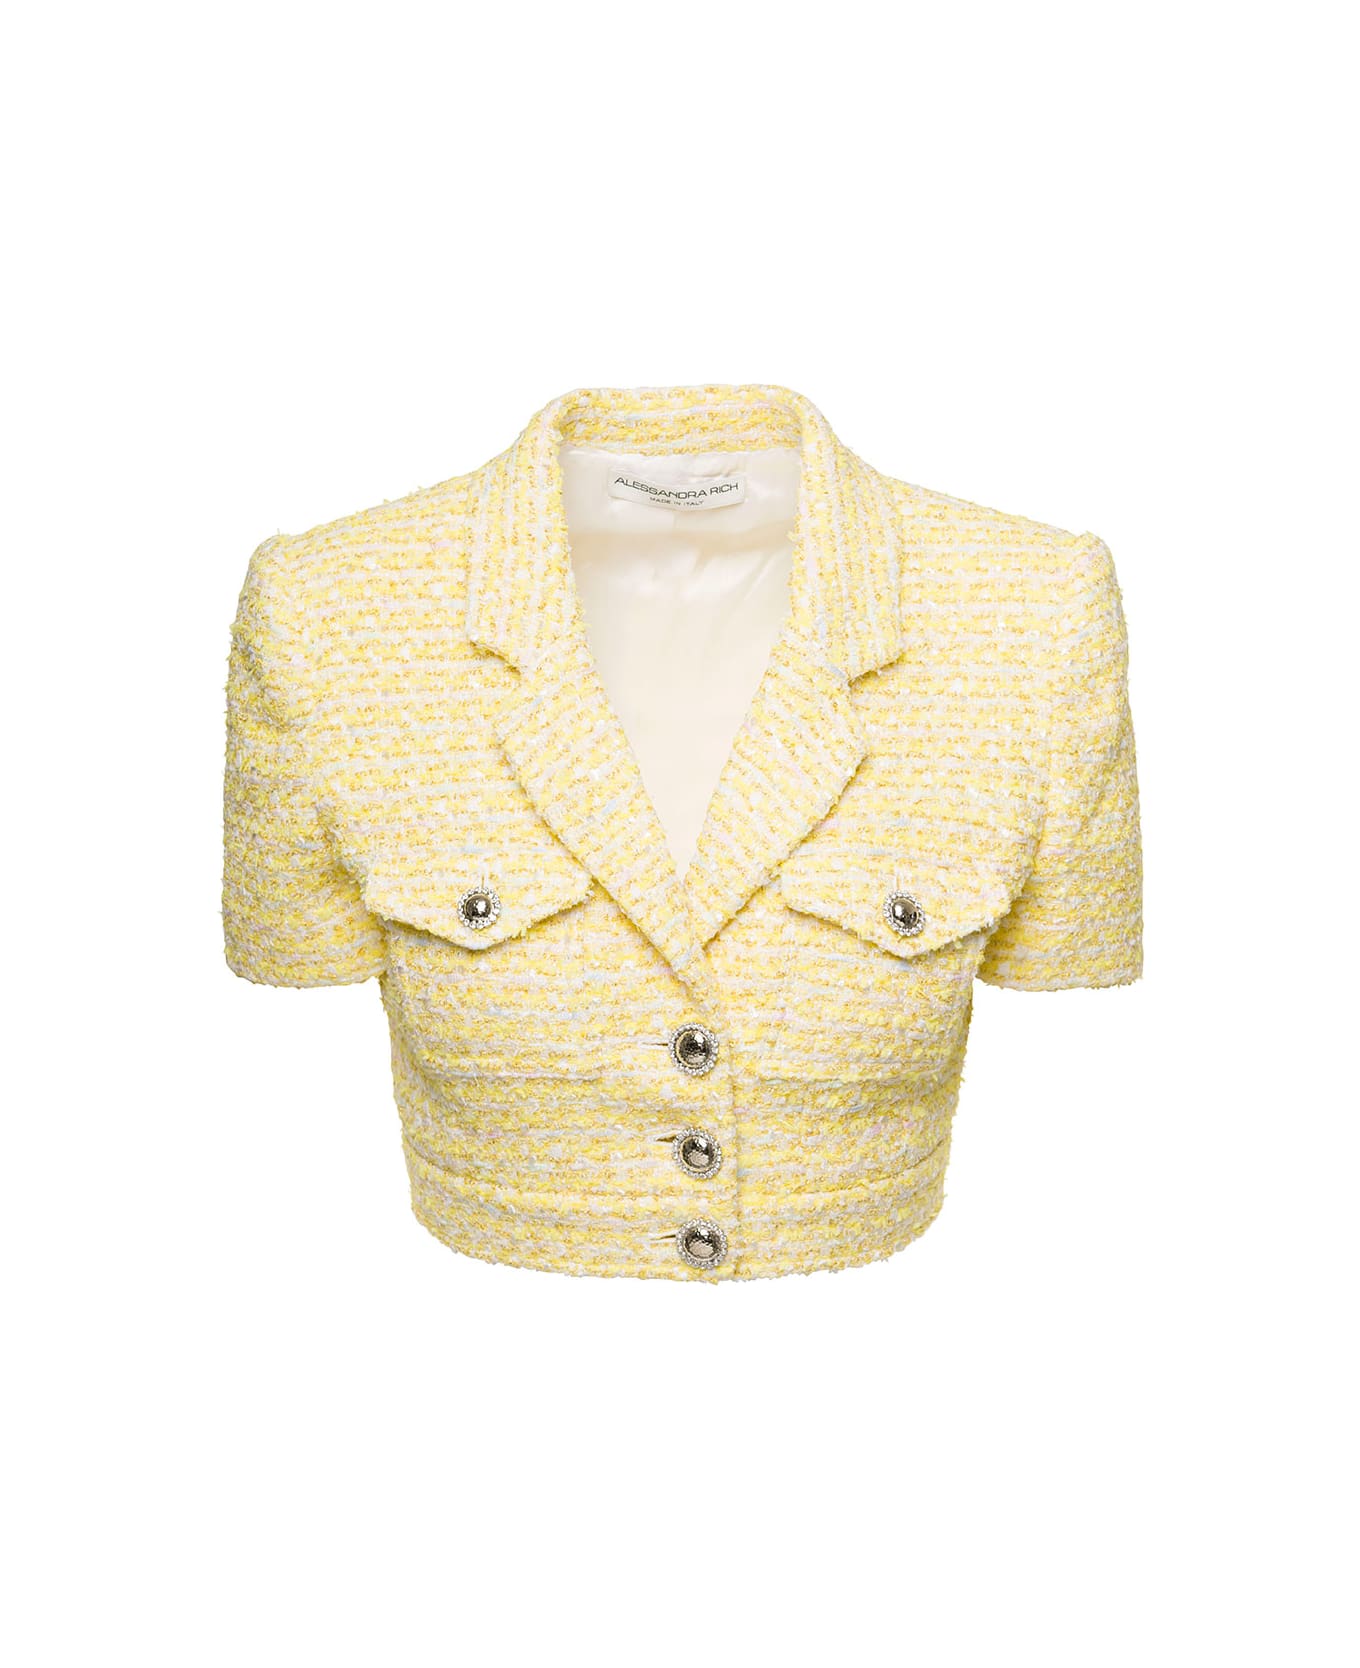 Alessandra Rich Cropped Jacket With Pockets And Silver Buttons In Tweed Lurex Yellow Woman - Yellow